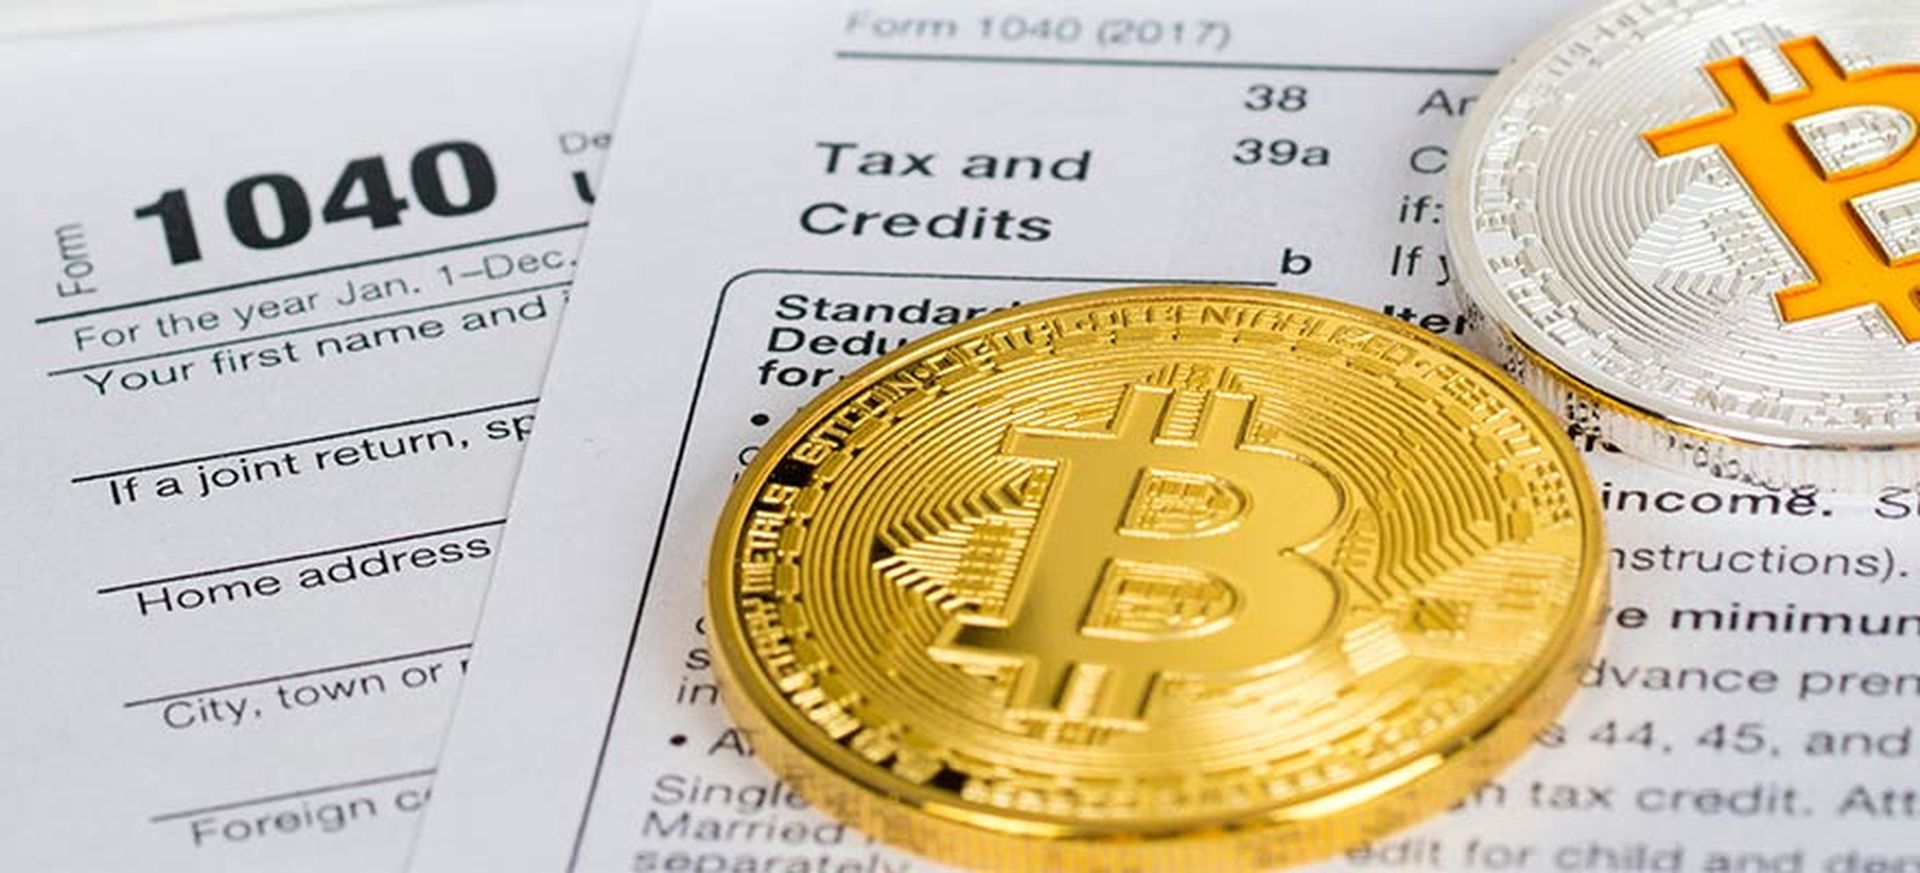 Beginning in 2023, Italy crypto tax will levy a 26% capital gains crypto tax on earnings. The new rule requires cryptocurrency owners to report their...